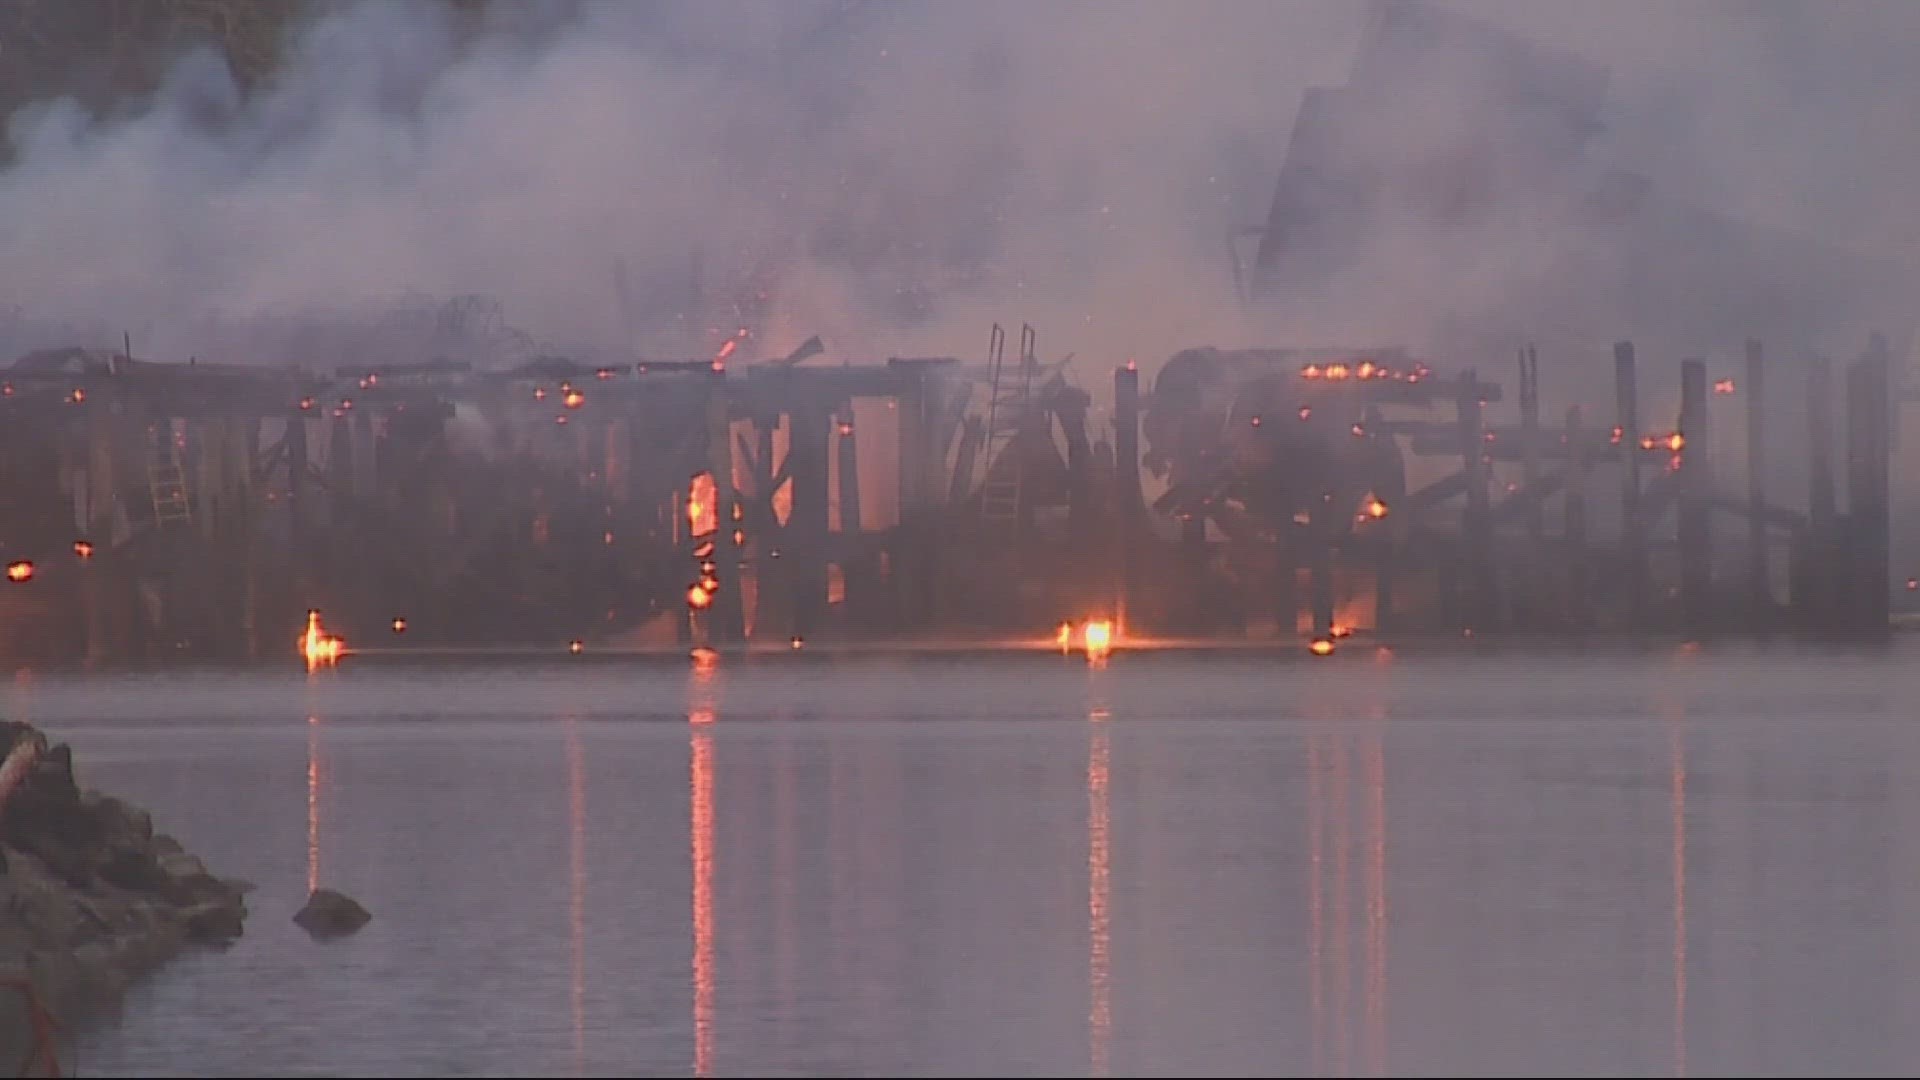 ​A major fire broke out at the Port of Ilwaco on the Washington side of the Columbia River mouth on Monday, pouring "hazardous" smoke over the marina.